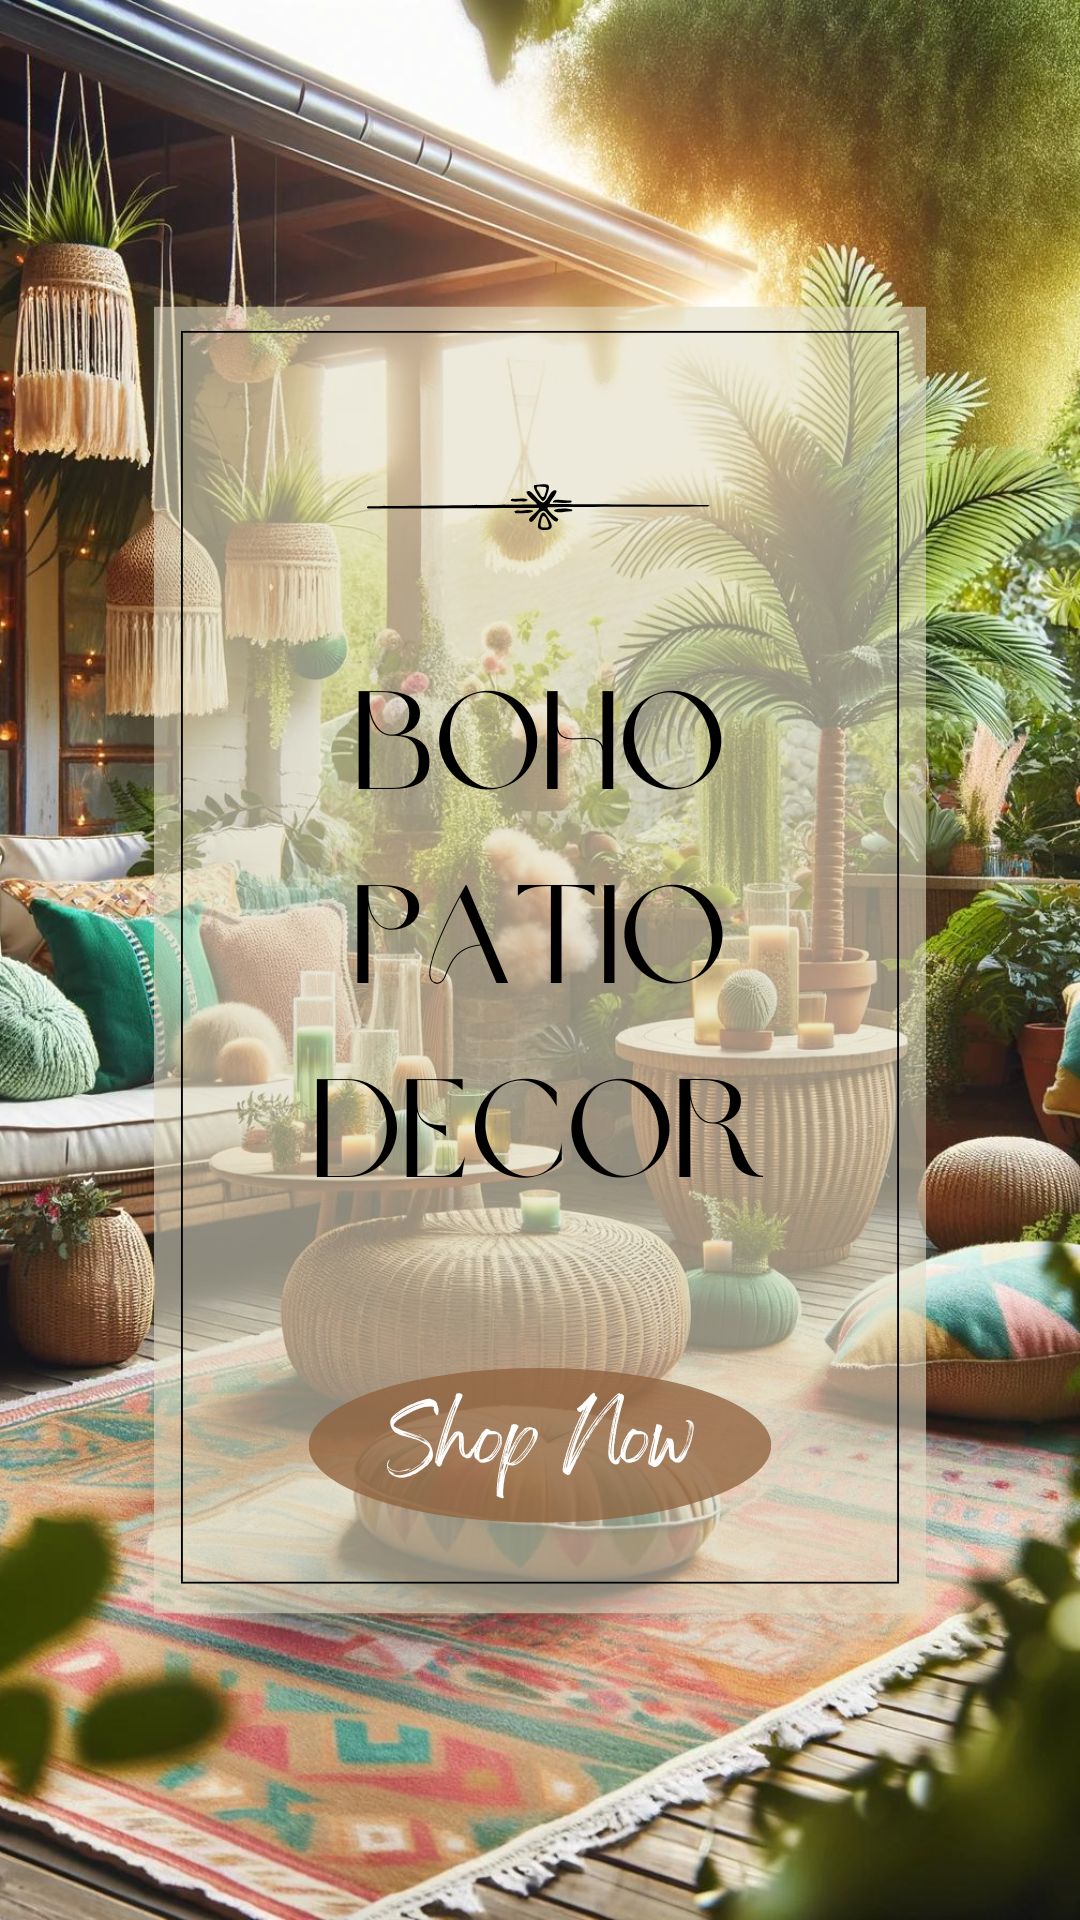 Plants are key for a boho outdoor patio look. They turn your space into a green haven of calm. Mix hanging and potted plants of all sizes. This adds beauty and texture. Use planters of natural materials, like ceramic or baskets, for that boho touch.